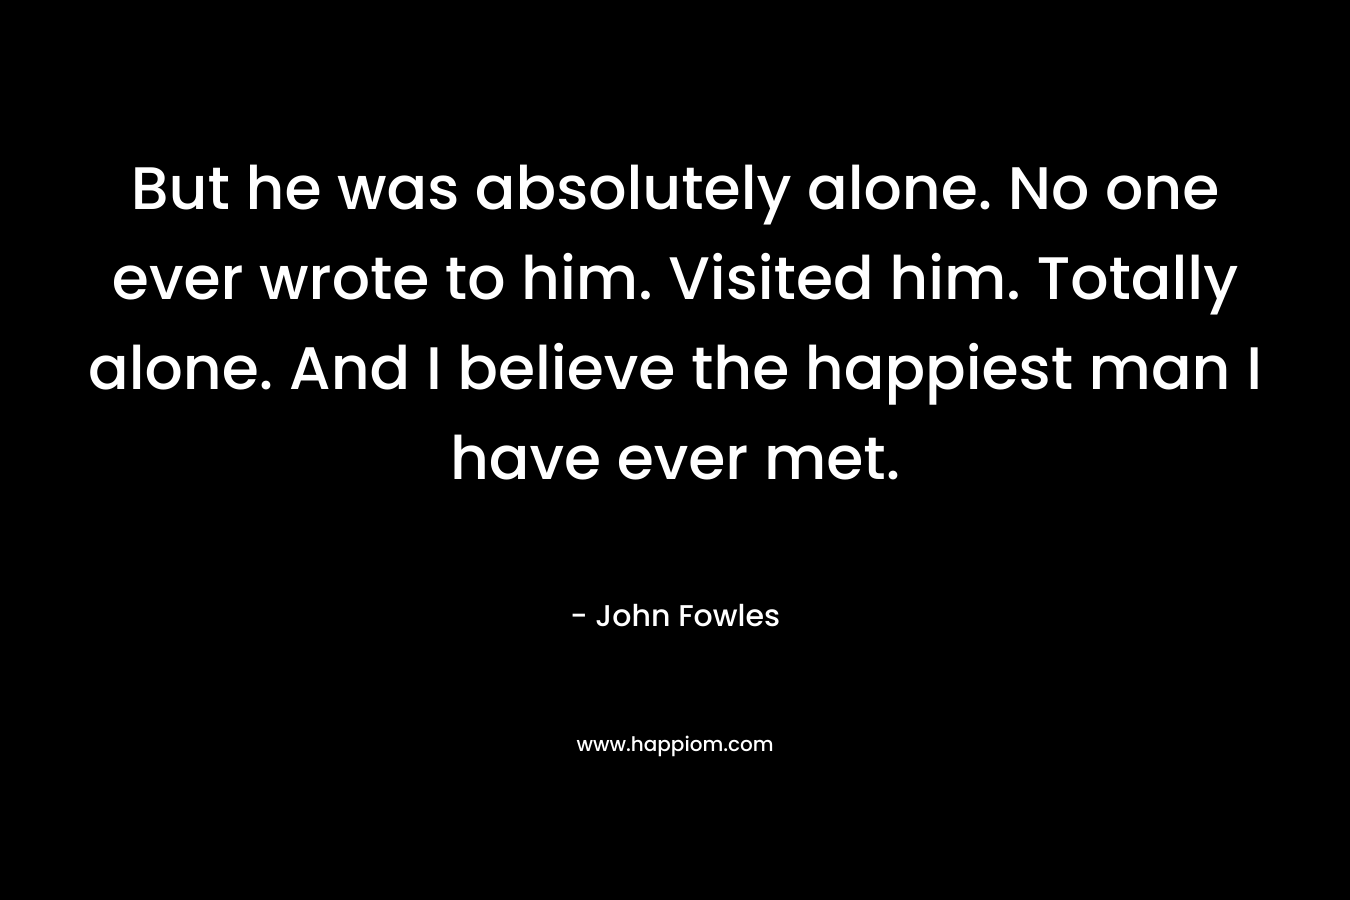 But he was absolutely alone. No one ever wrote to him. Visited him. Totally alone. And I believe the happiest man I have ever met. – John Fowles